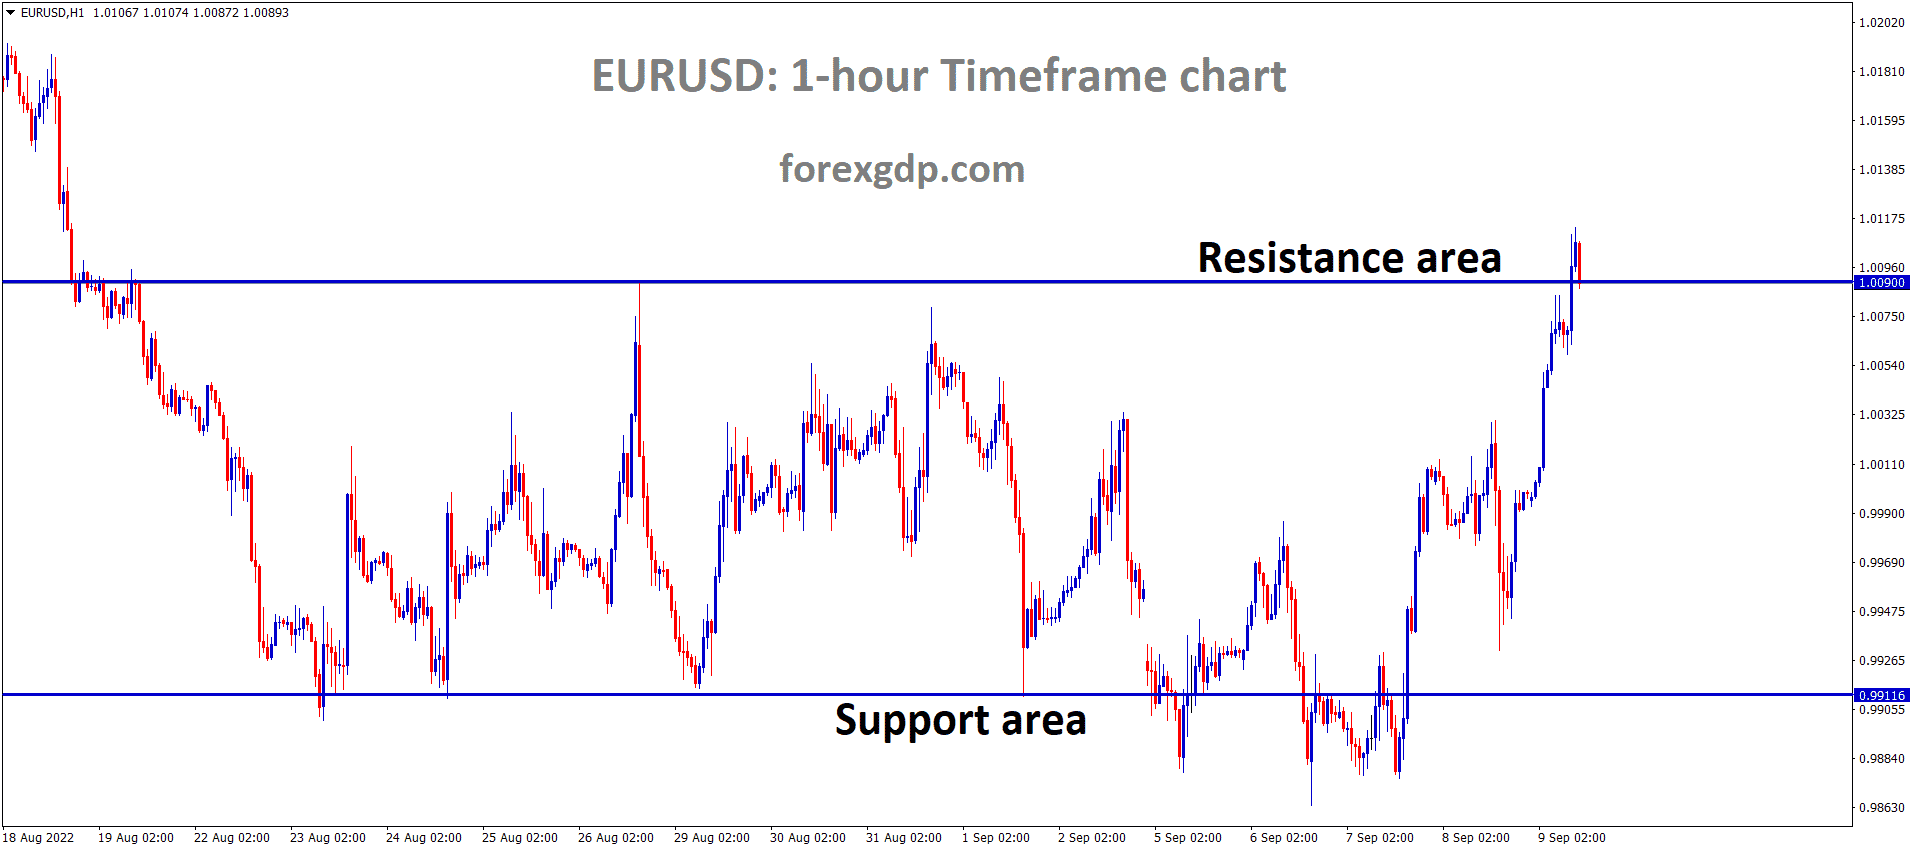 EURUSD is moving in the Box pattern and the market has reached the Resistance area of the pattern